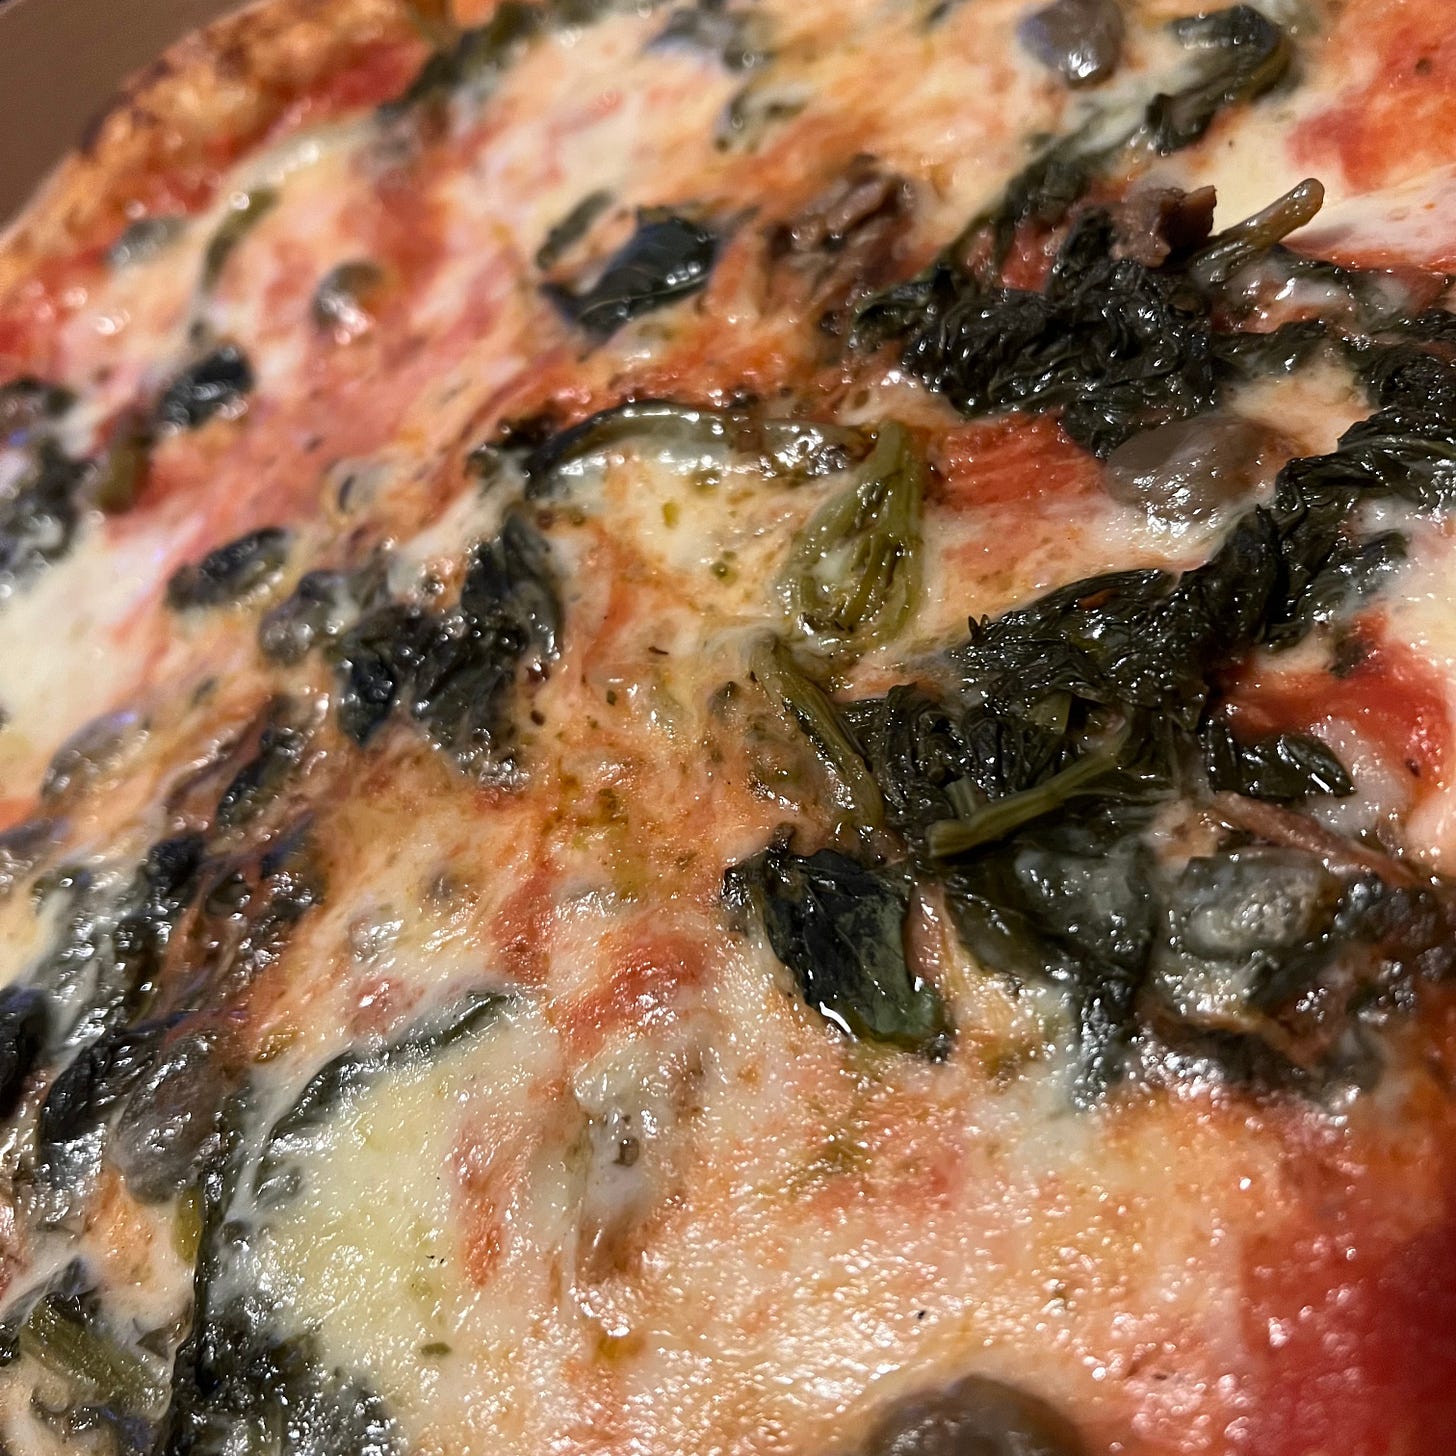 Neapolitan: a tomato and mozzarella base with onions, anchovies, capers, olives and oregano with an add-on of friarelli stems